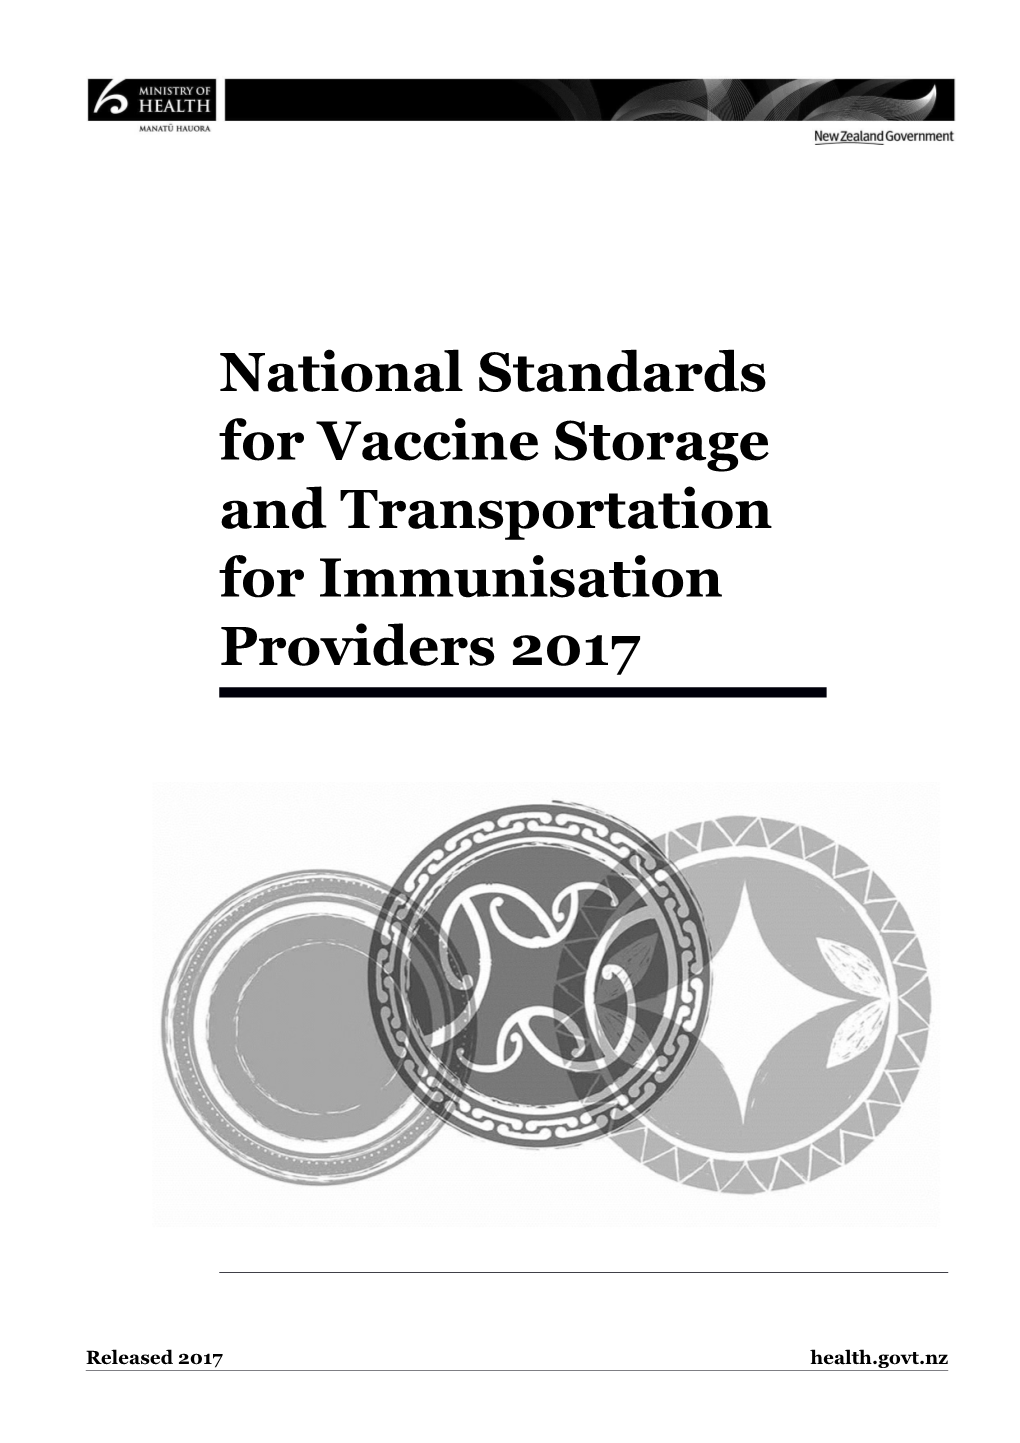 National Standards for Vaccine Storage and Transportation for Immunisation Providers